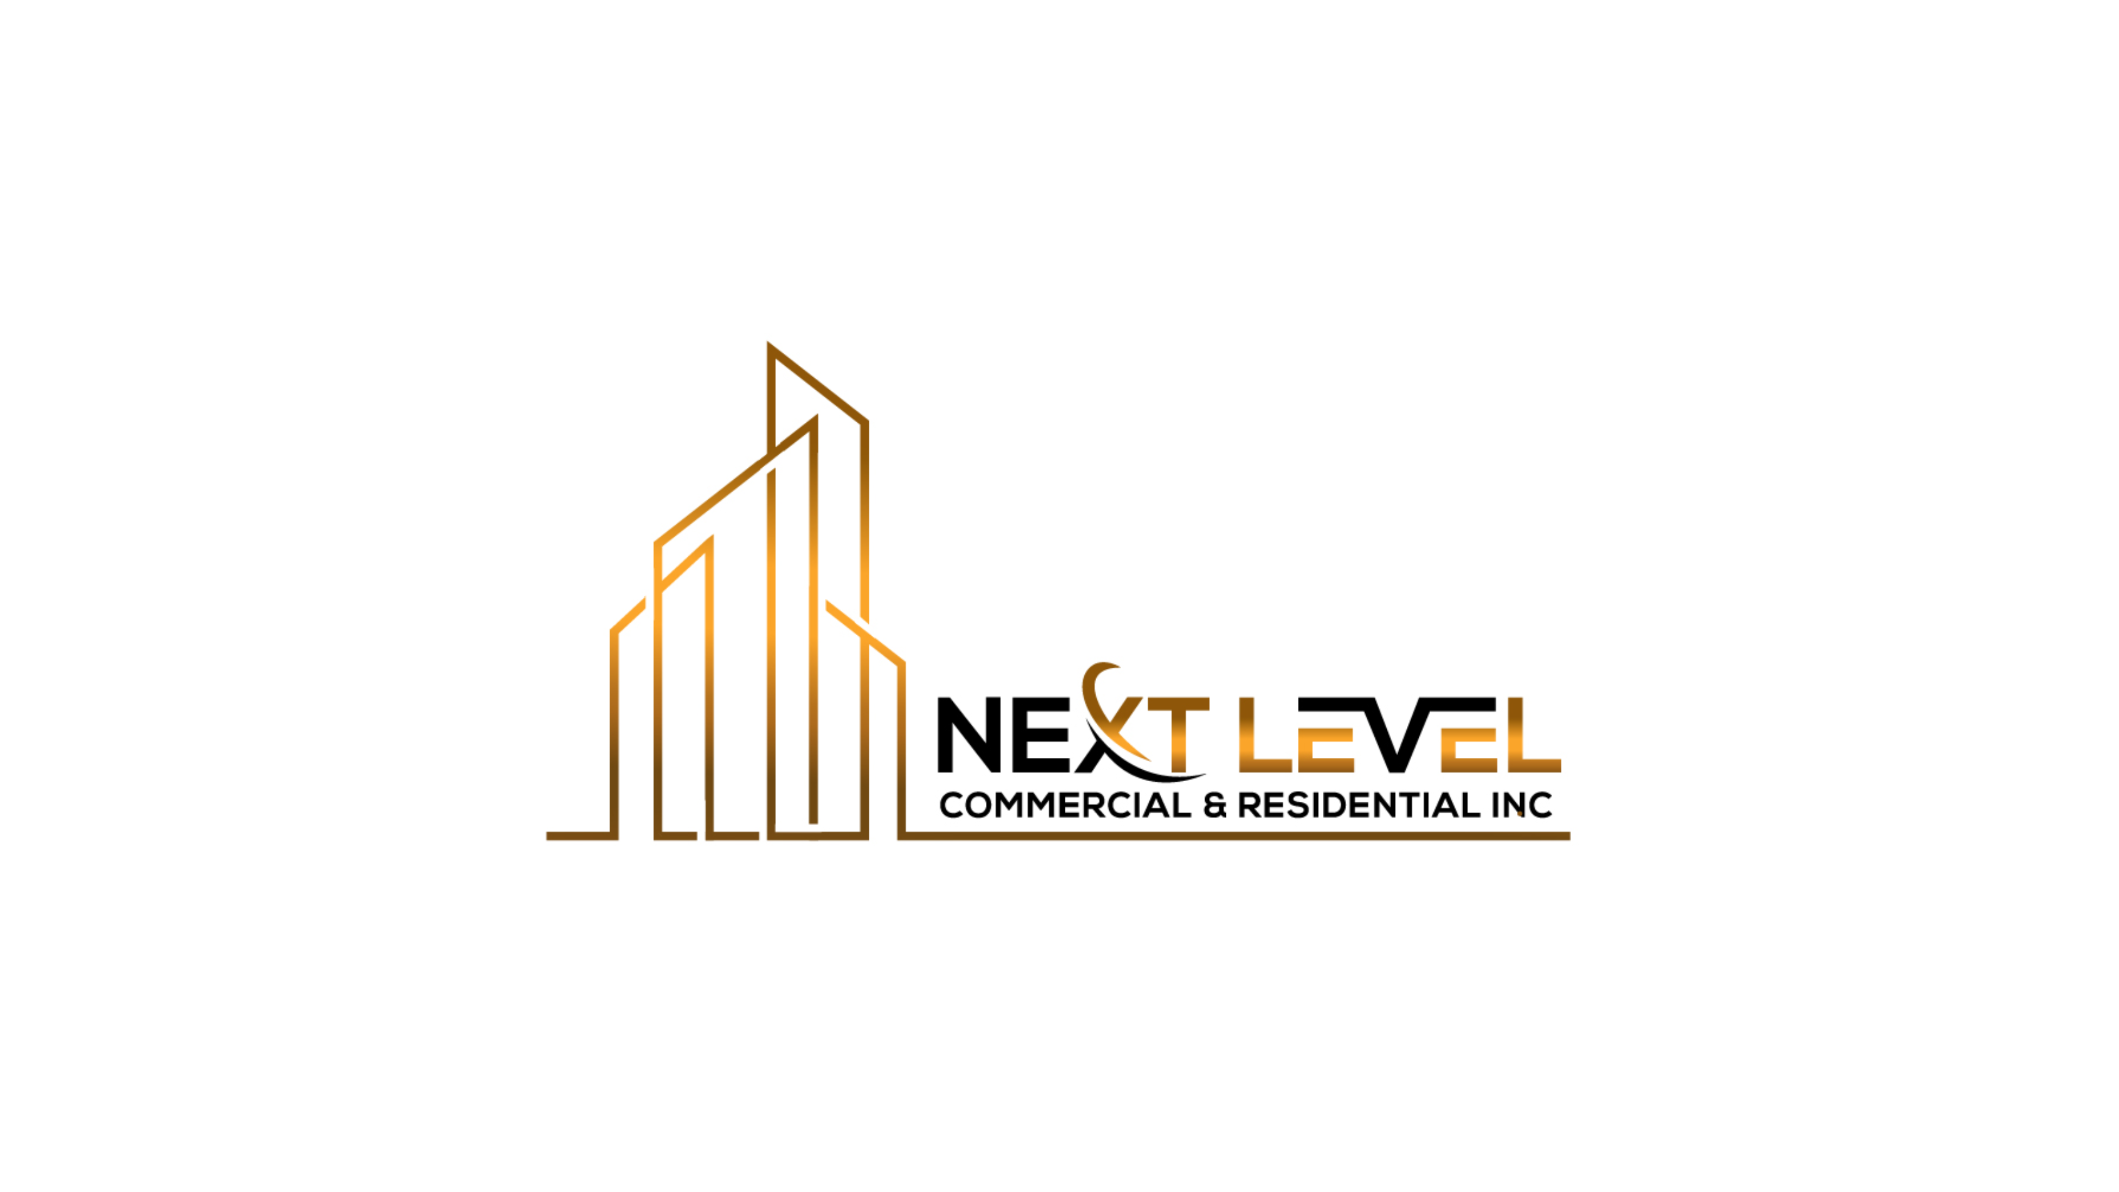 Next Level Commercial & Residential Inc. Fort Erie (905)580-1551